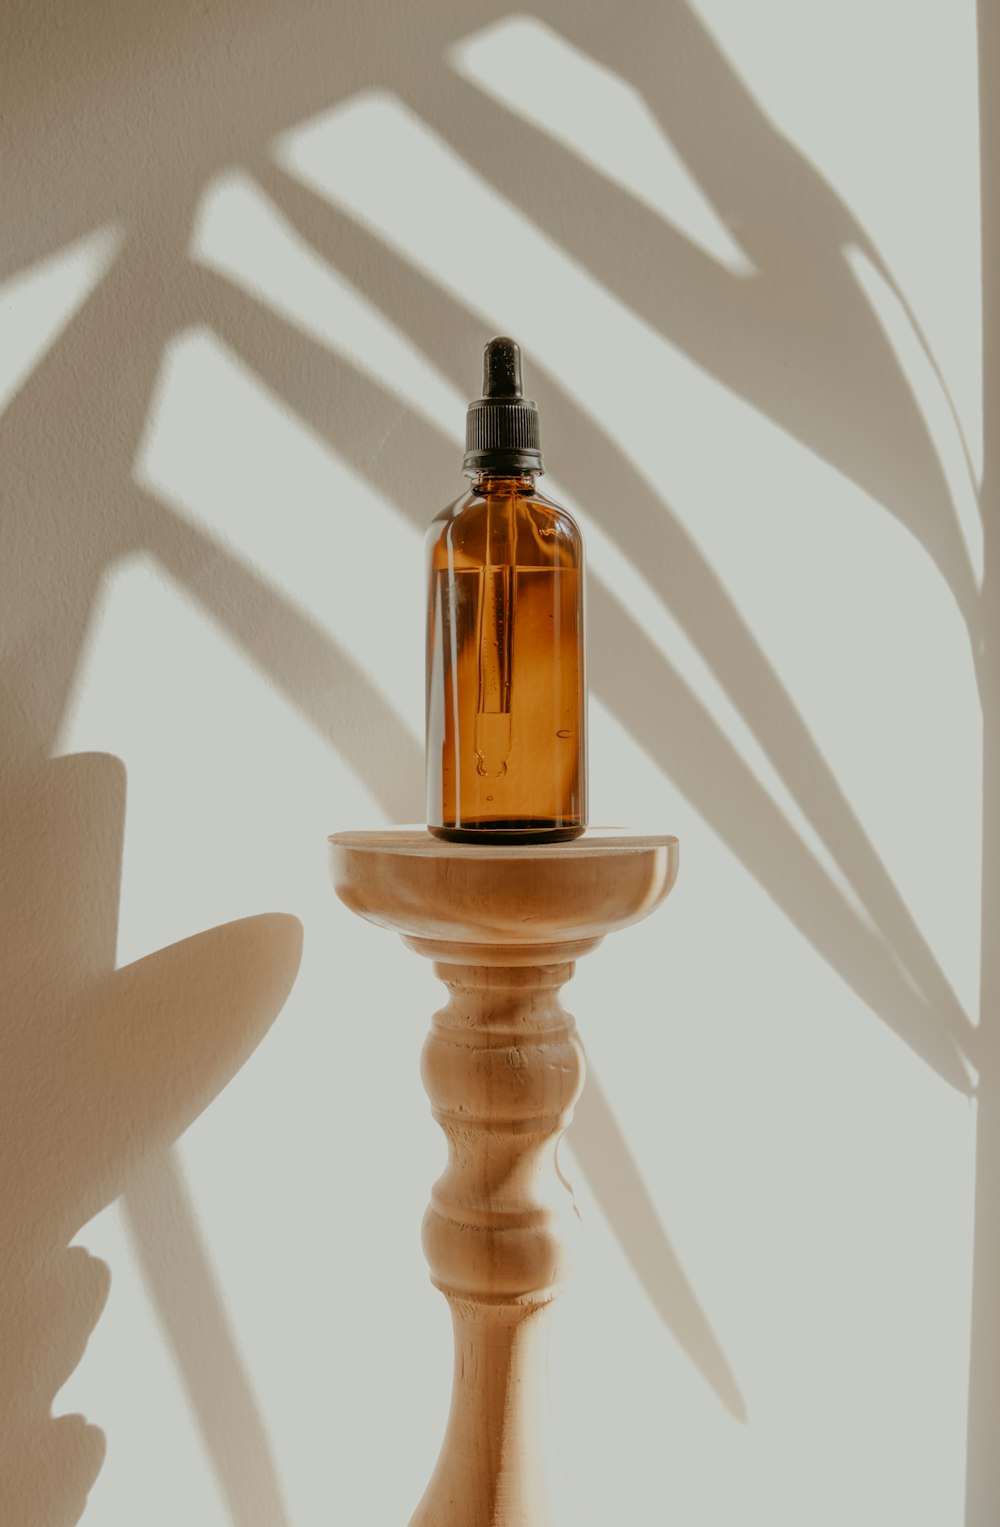 1500+ Product Photography Pictures | Download Free Images on Unsplash